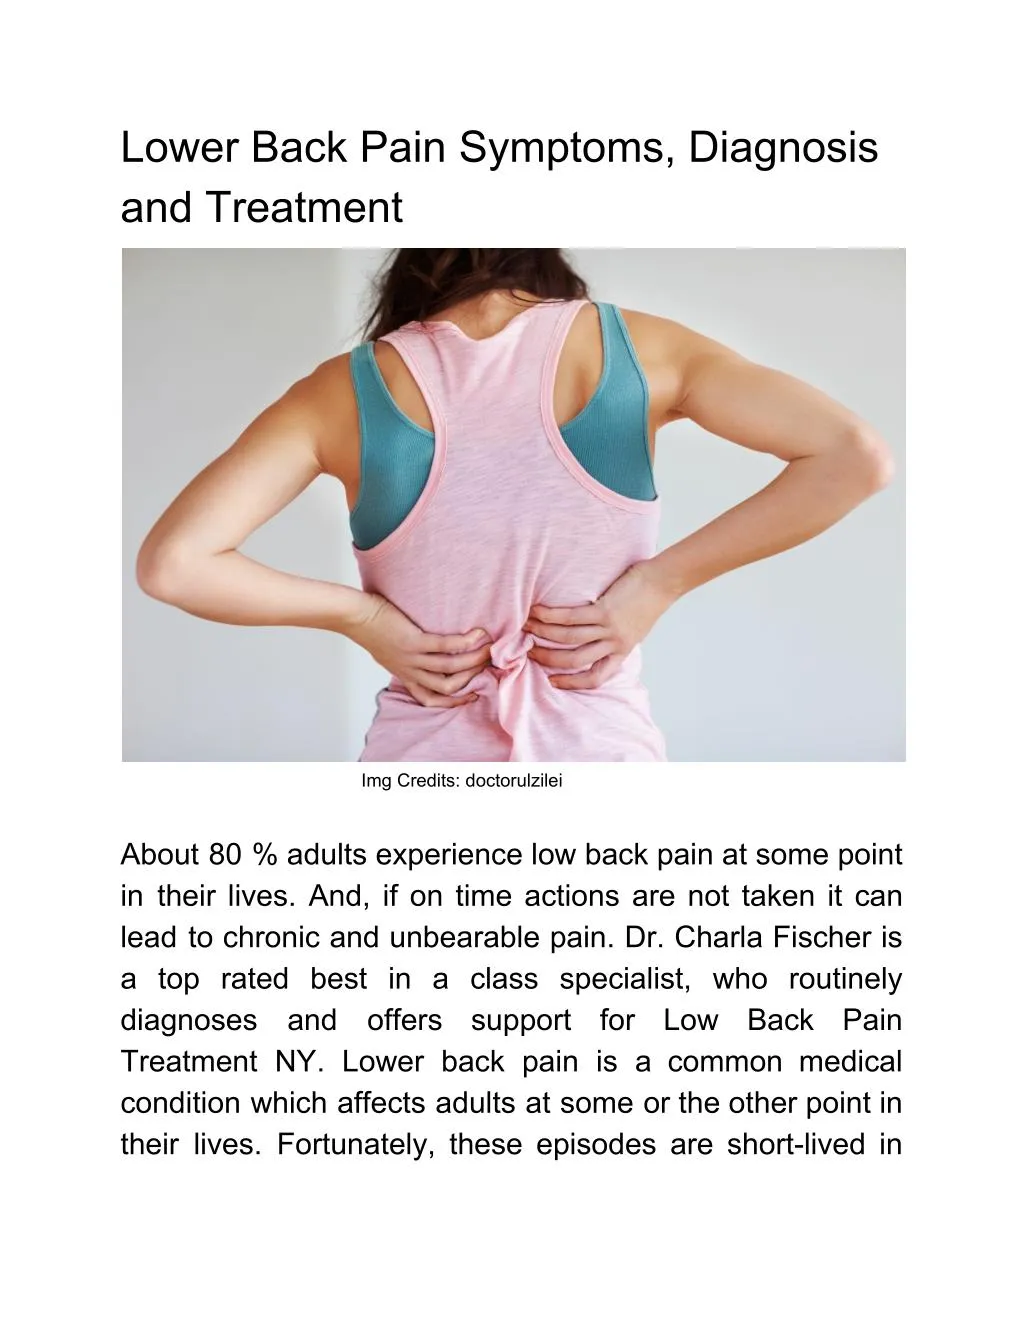 lower back pain symptoms diagnosis and treatment